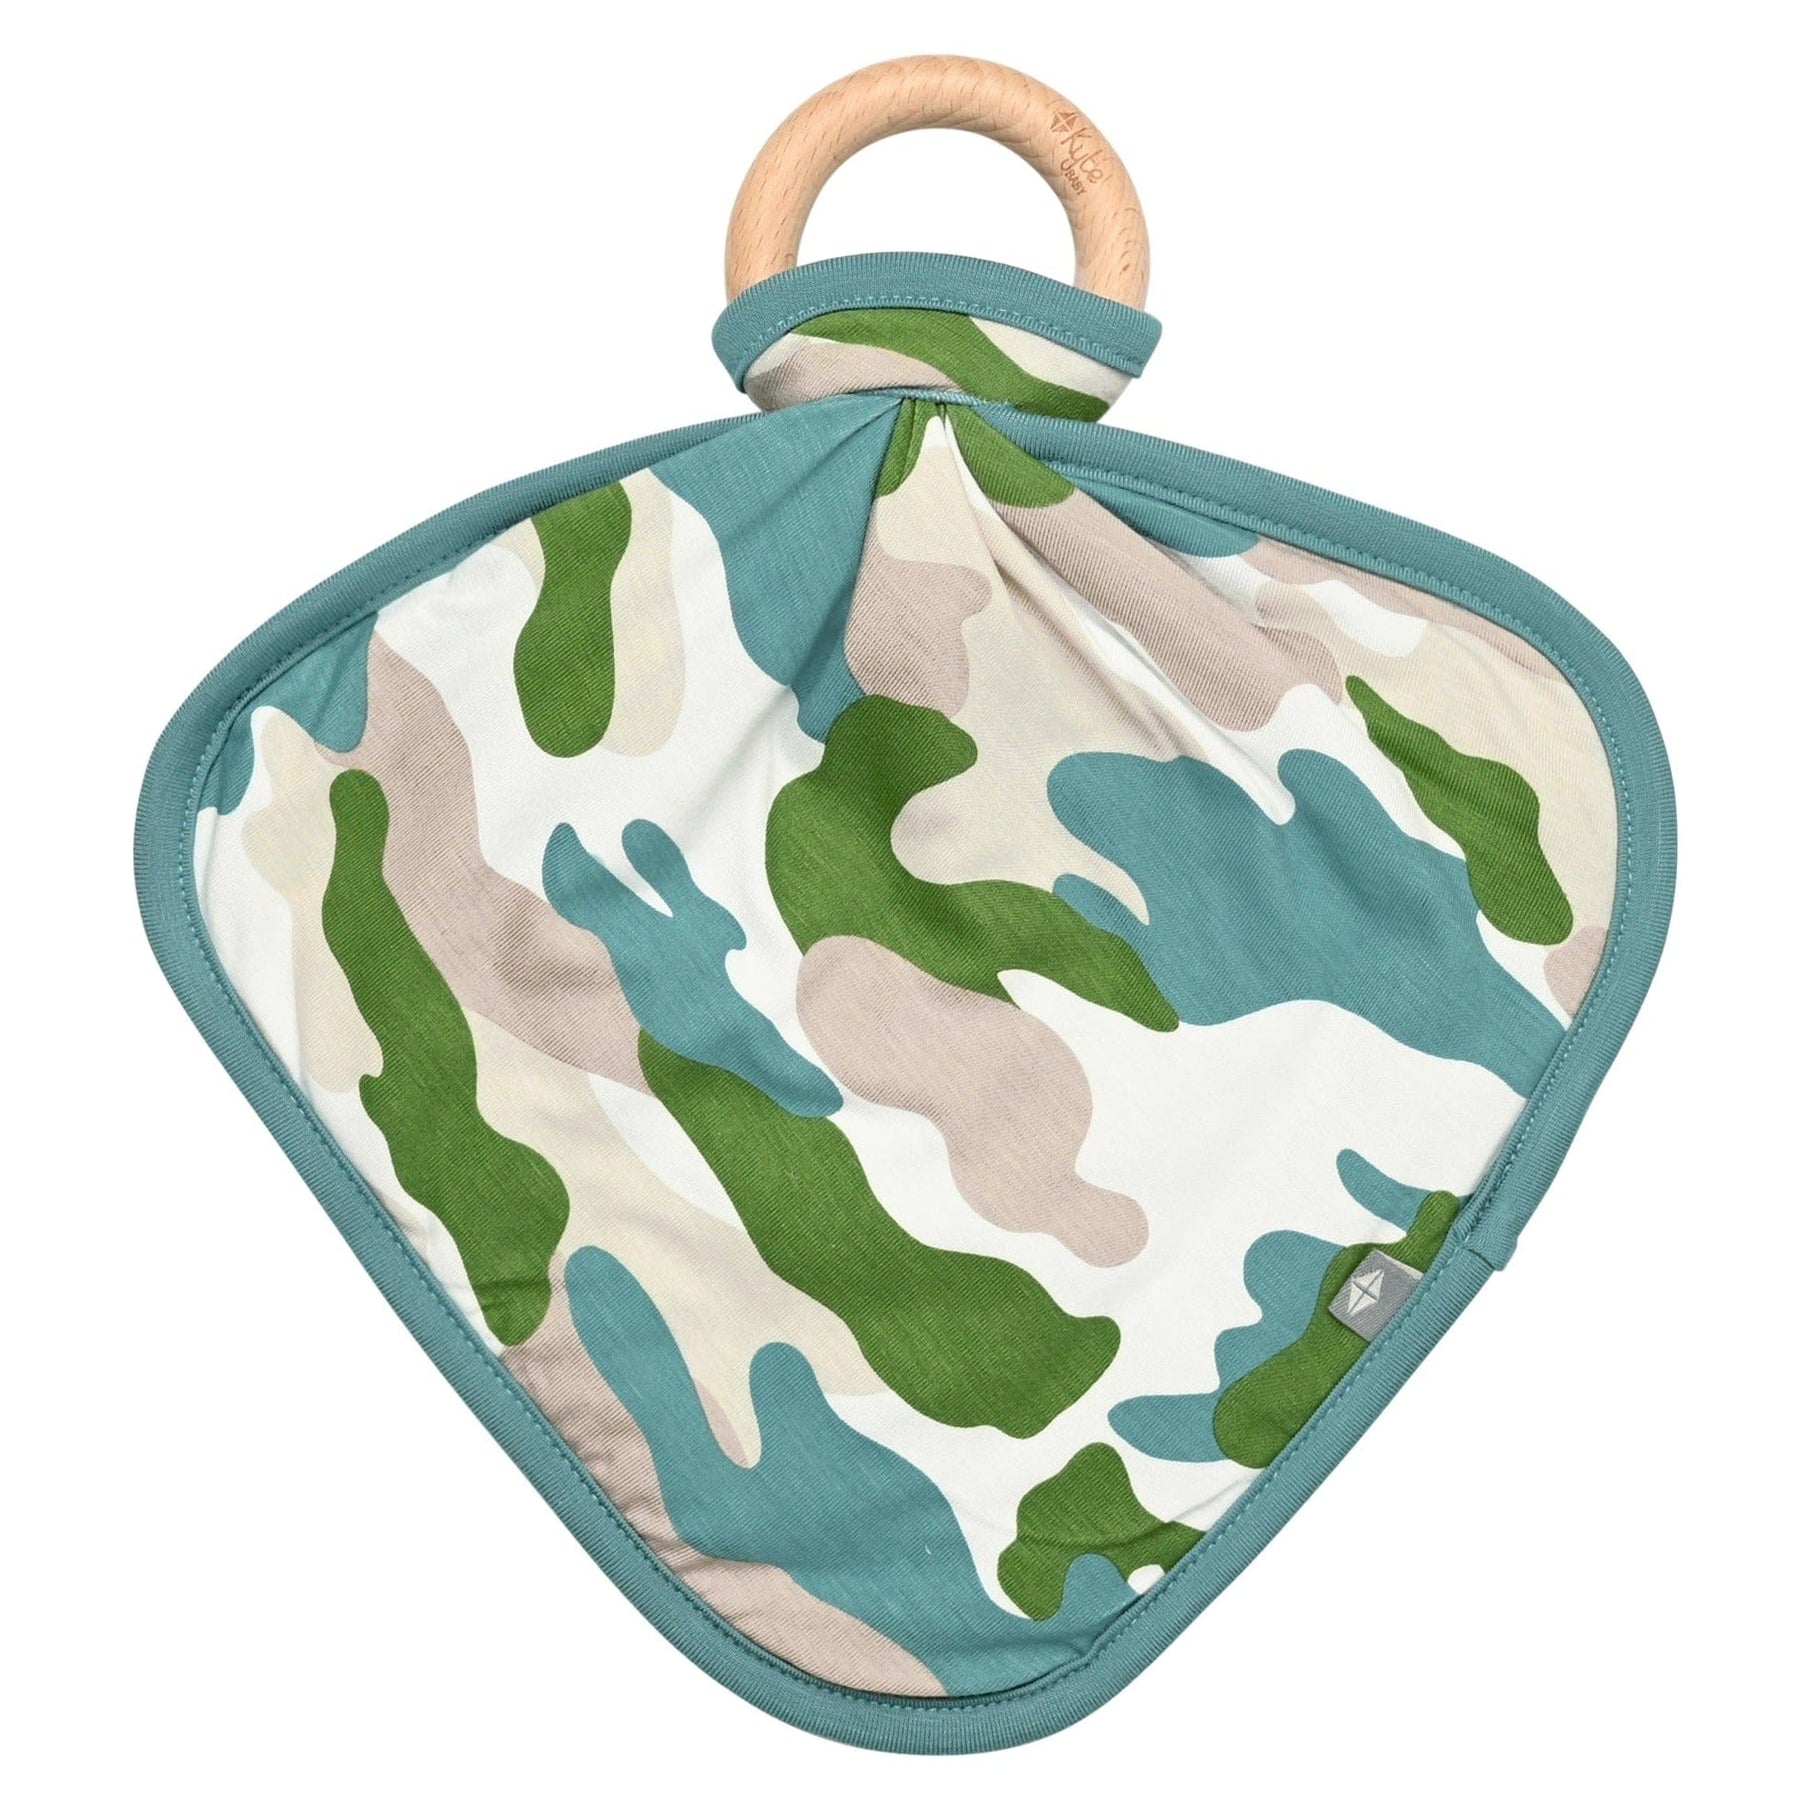 Kyte BABY Lovey in Camo with Removable Teething Ring